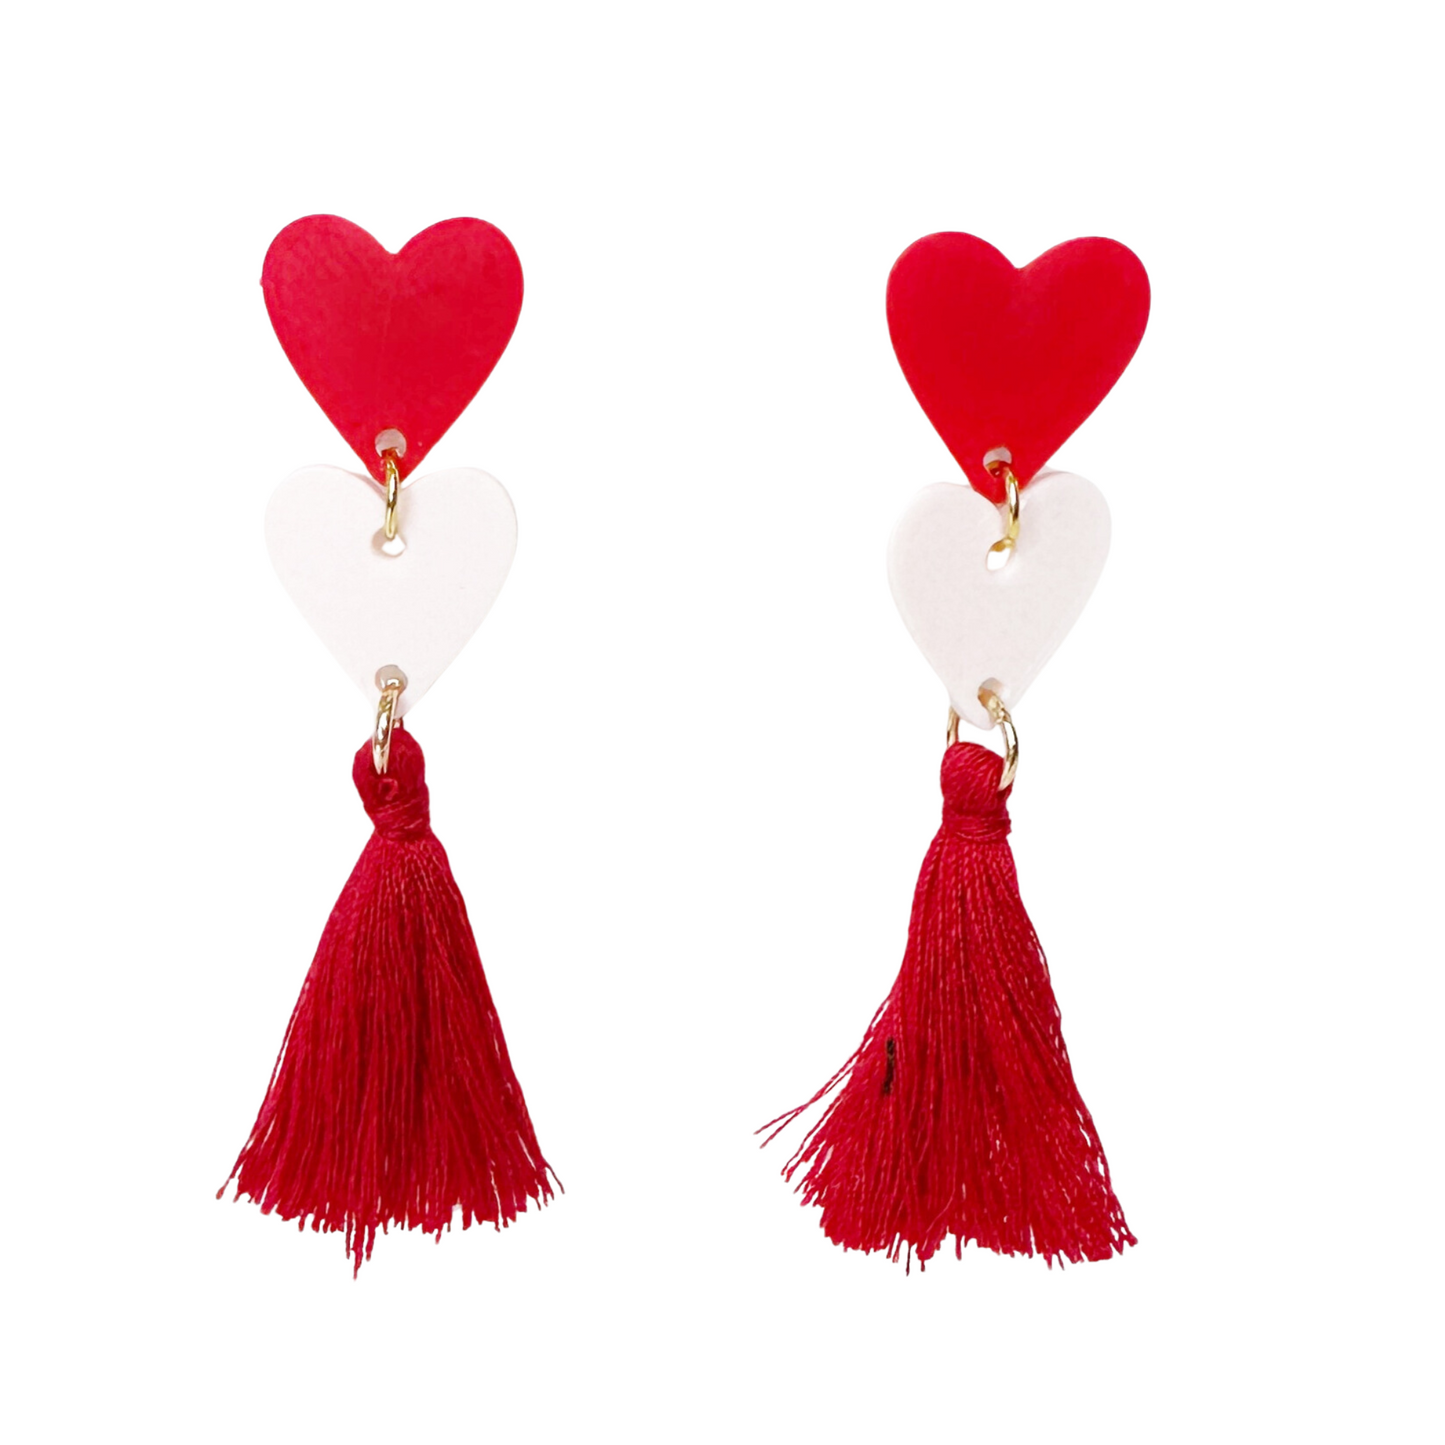 3D Printed Valentine's Day Heart Drop Earrings with Tassels